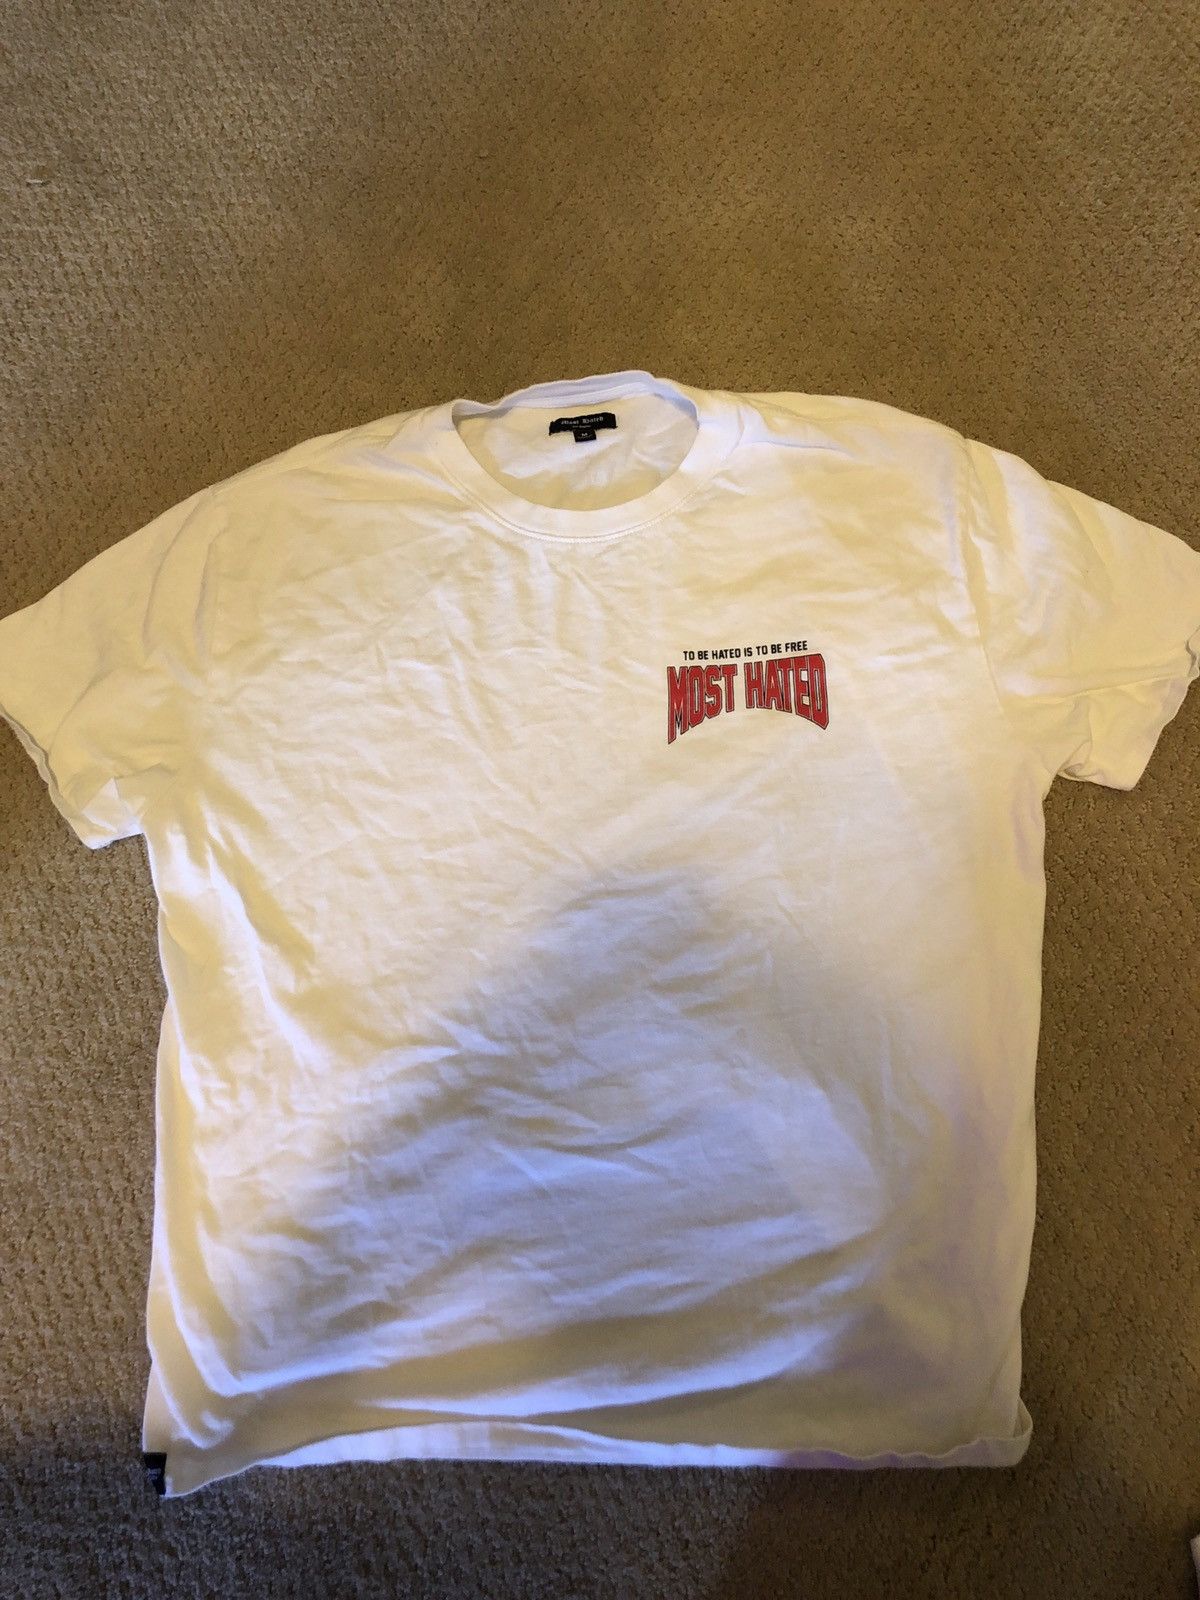 Red /white MOST HATED t shirt – MH Apparel And Merchandise